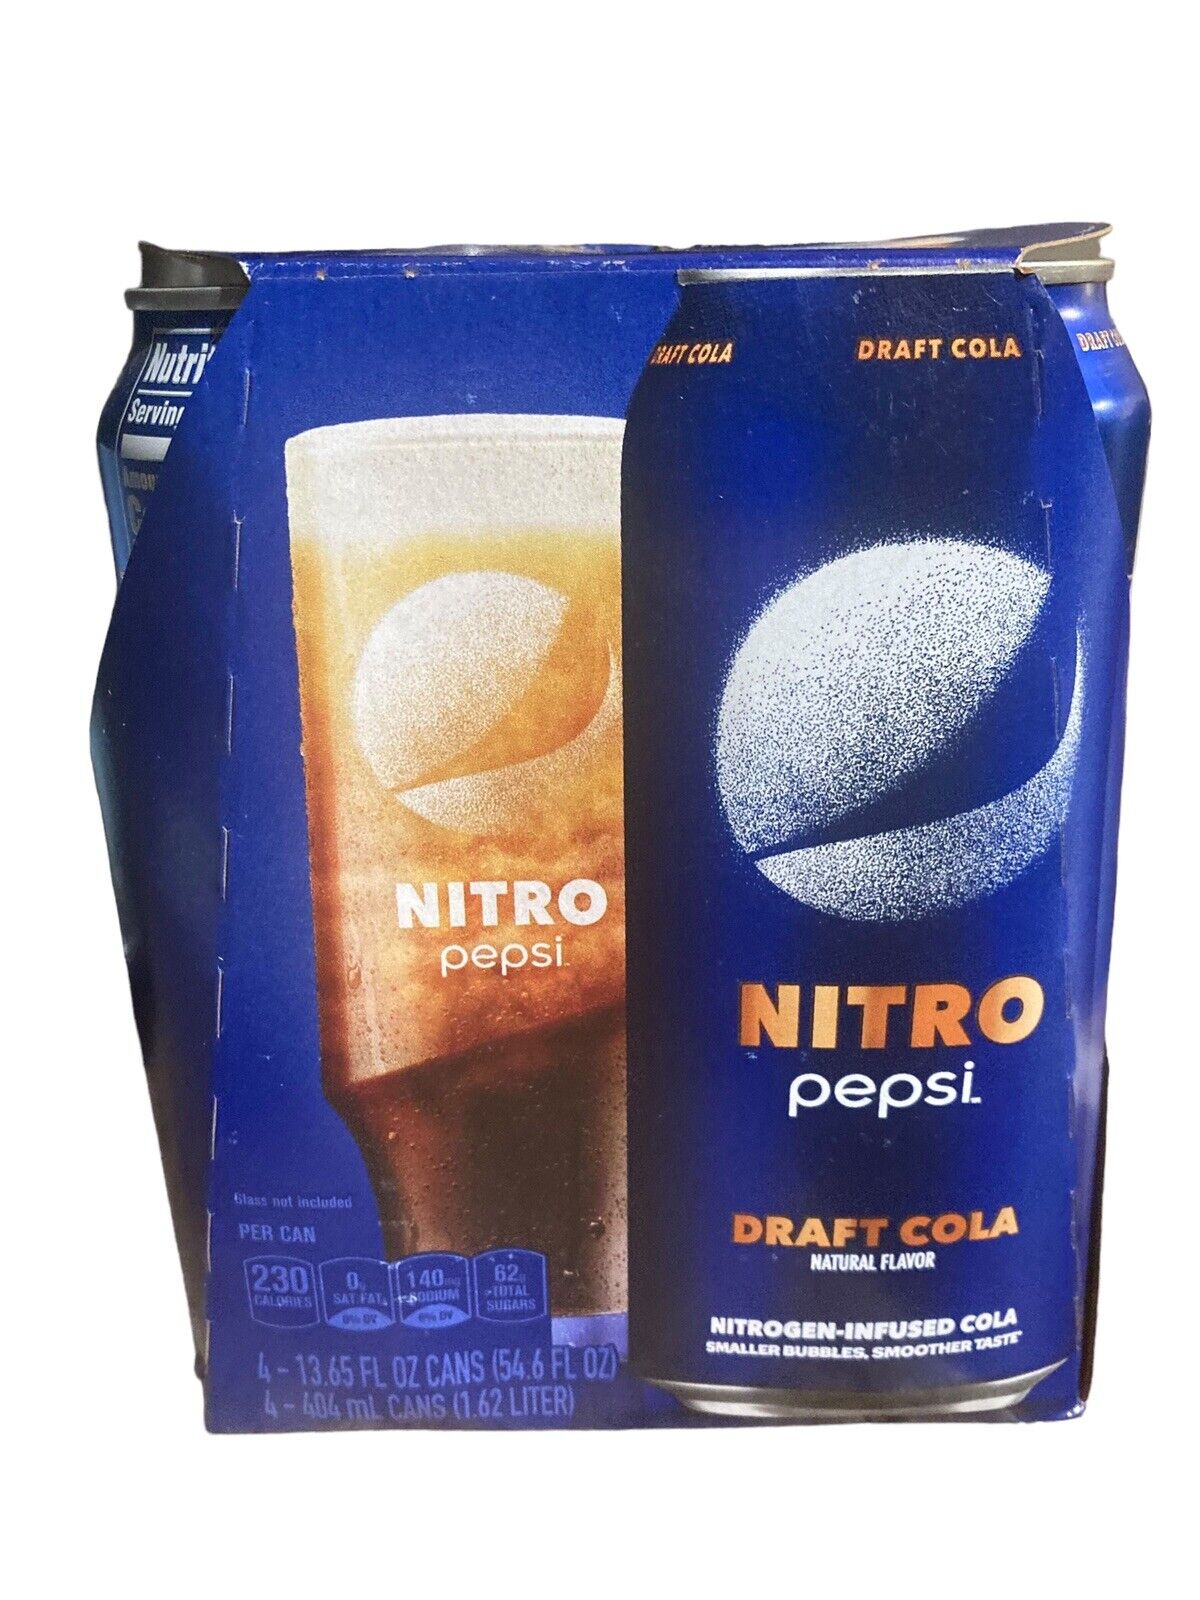 NEW Pepsi Nitro Draft Cola  (4-pack) Limited Time Limited Release Areas